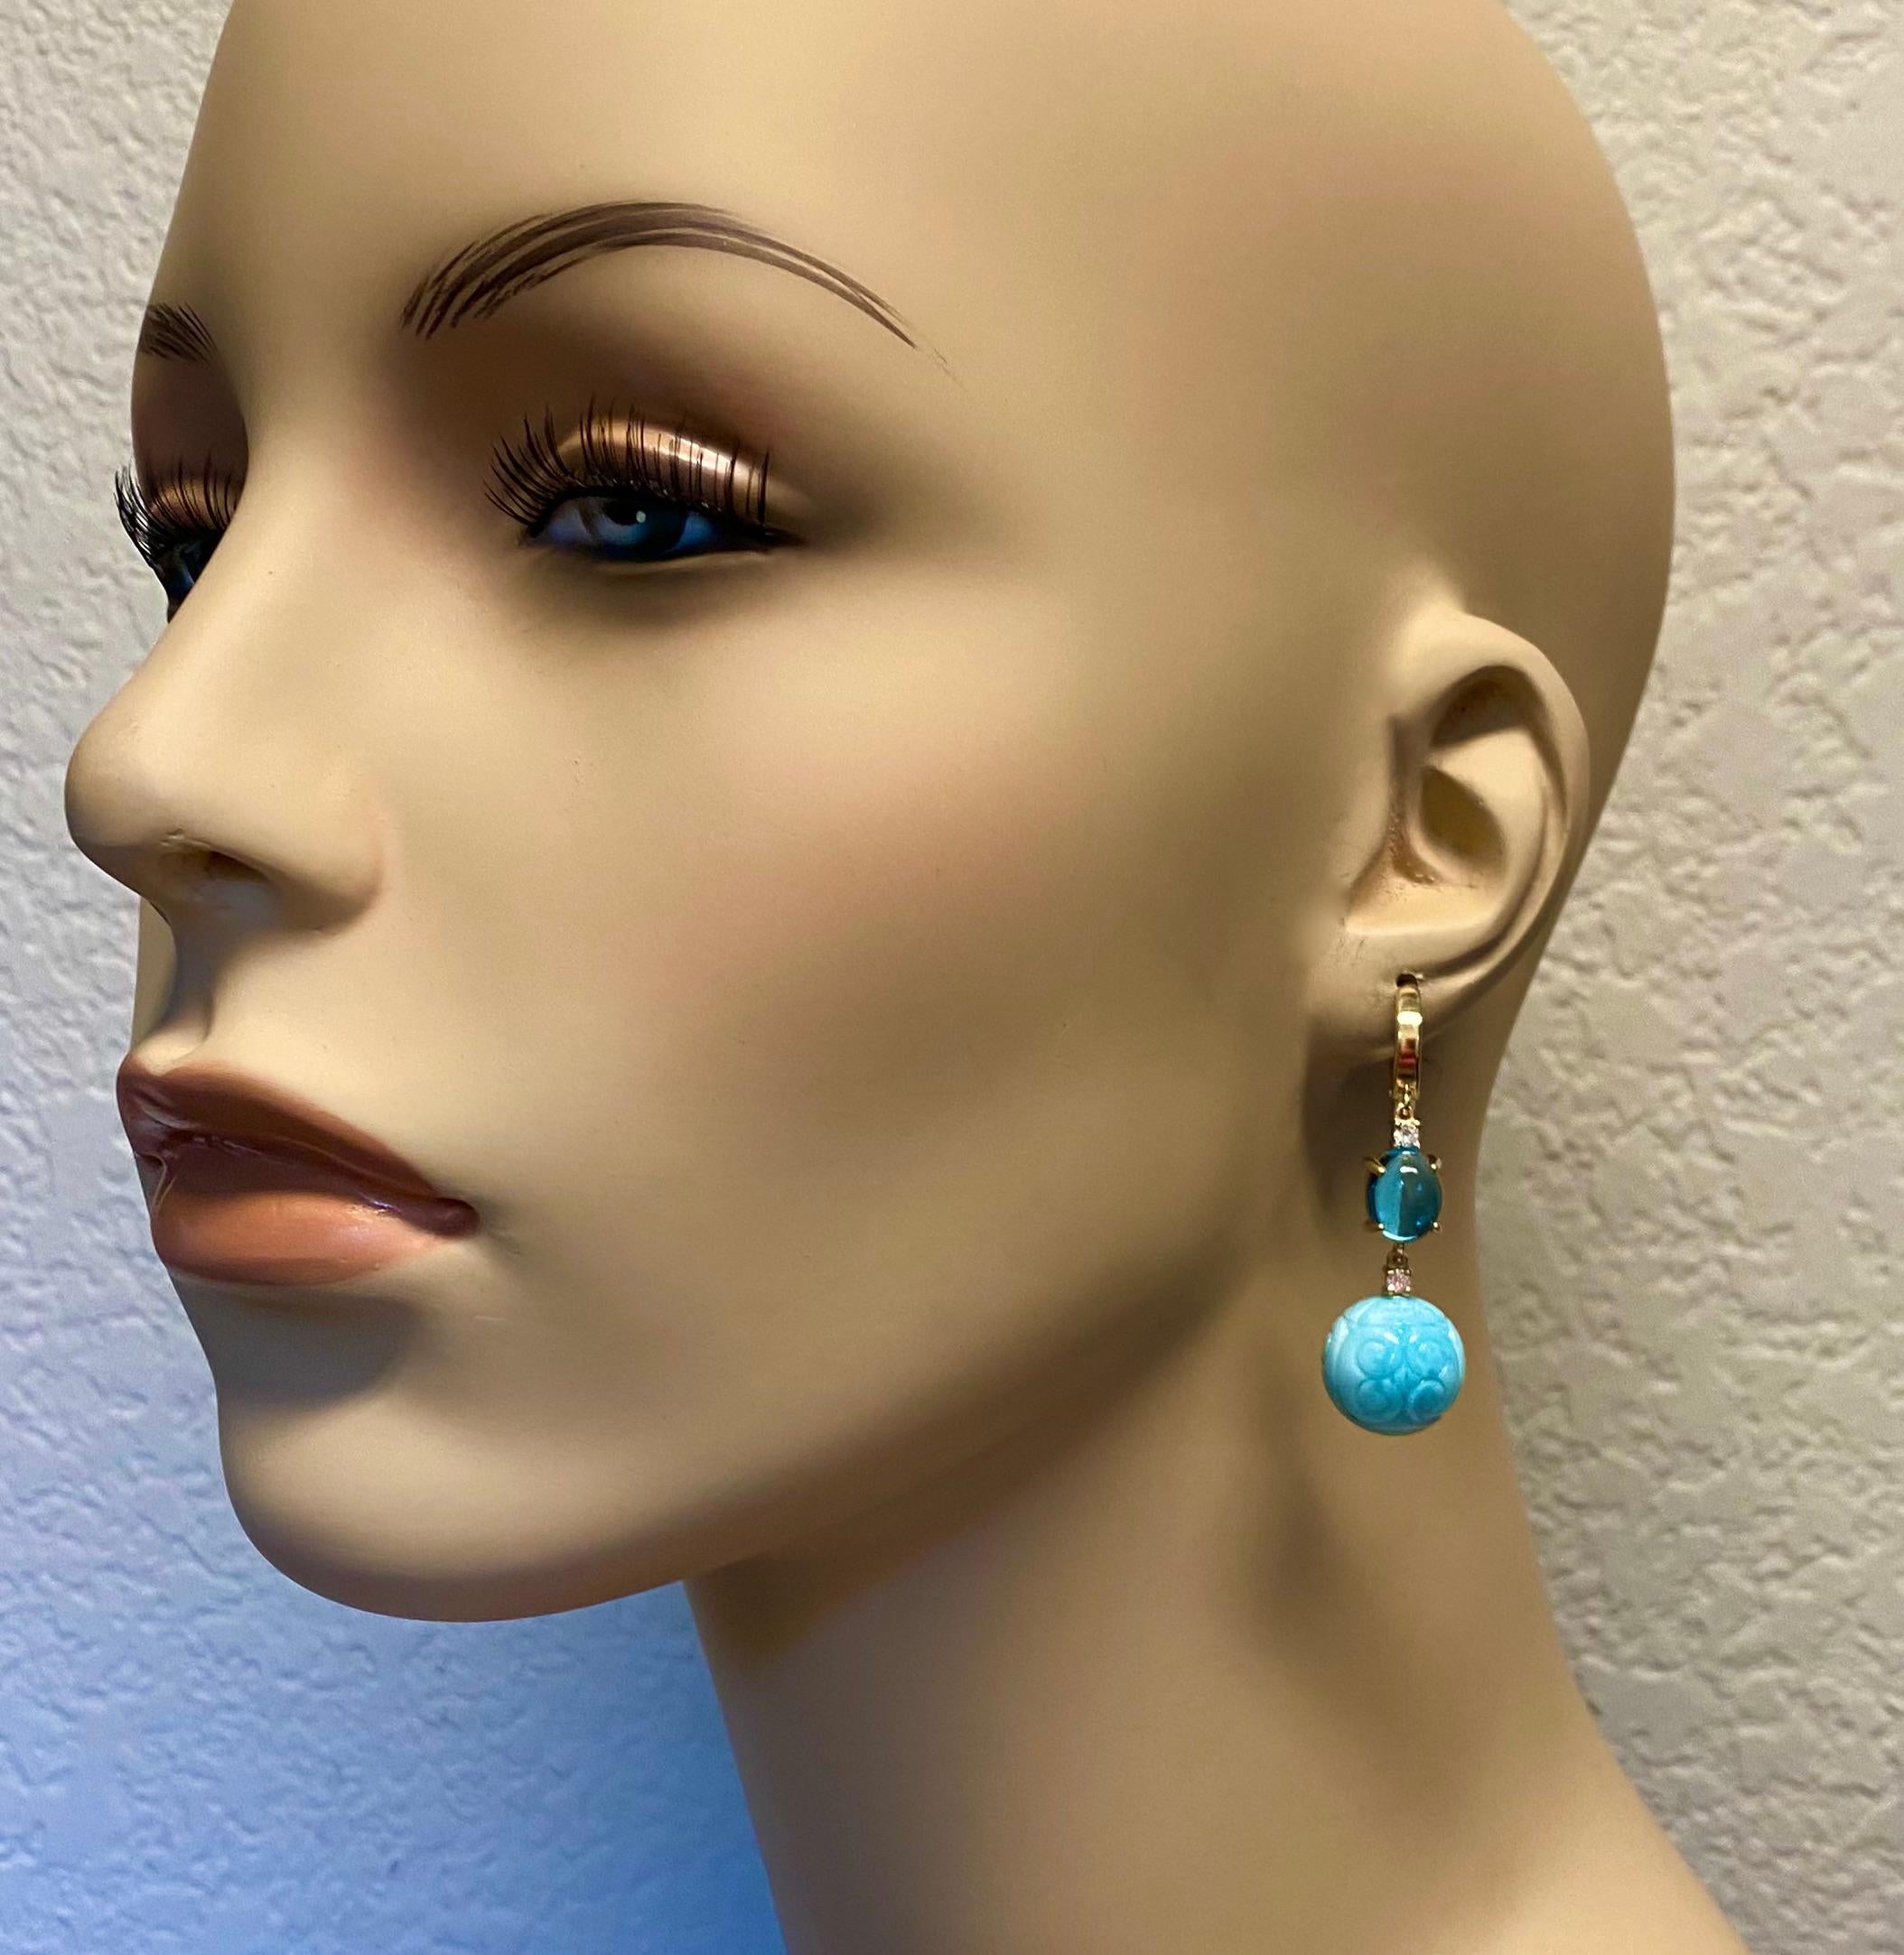 Larimar is paired with Swiss blue topaz in these eminently wearable dangle earrings.  Larimar is a rare blue variety of the silicate mineral pectolite found only in the Dominican Republic, near the city of Barahona.  The gem is known for its rich